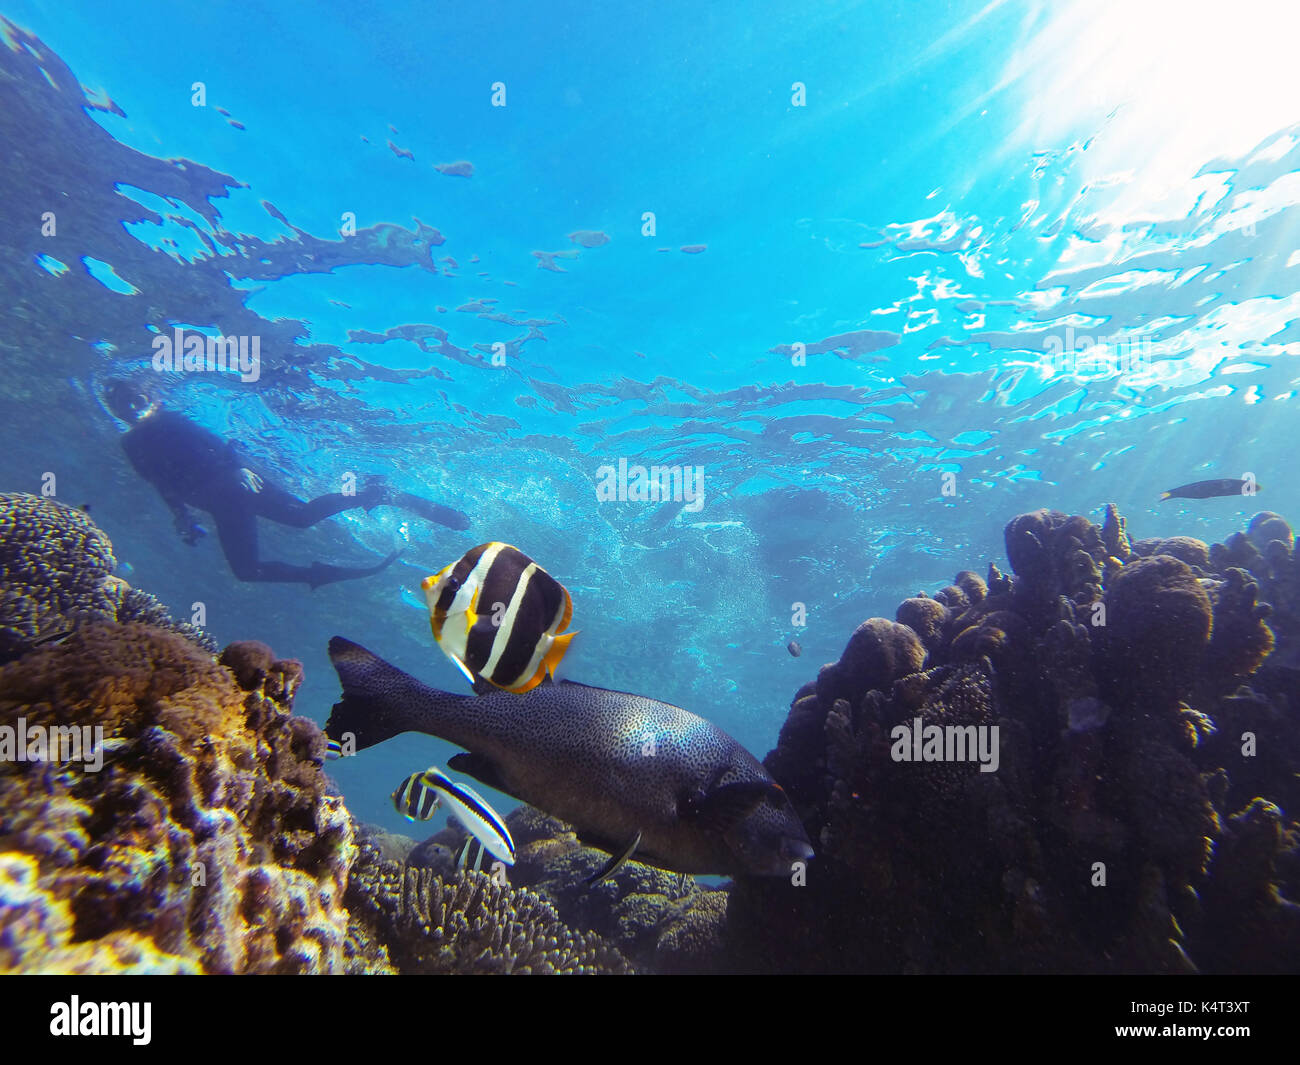 Snorkeller underwater with fish and corals, North Bay, Lord Howe Island, NSW, Australia. No MR or PR Stock Photo